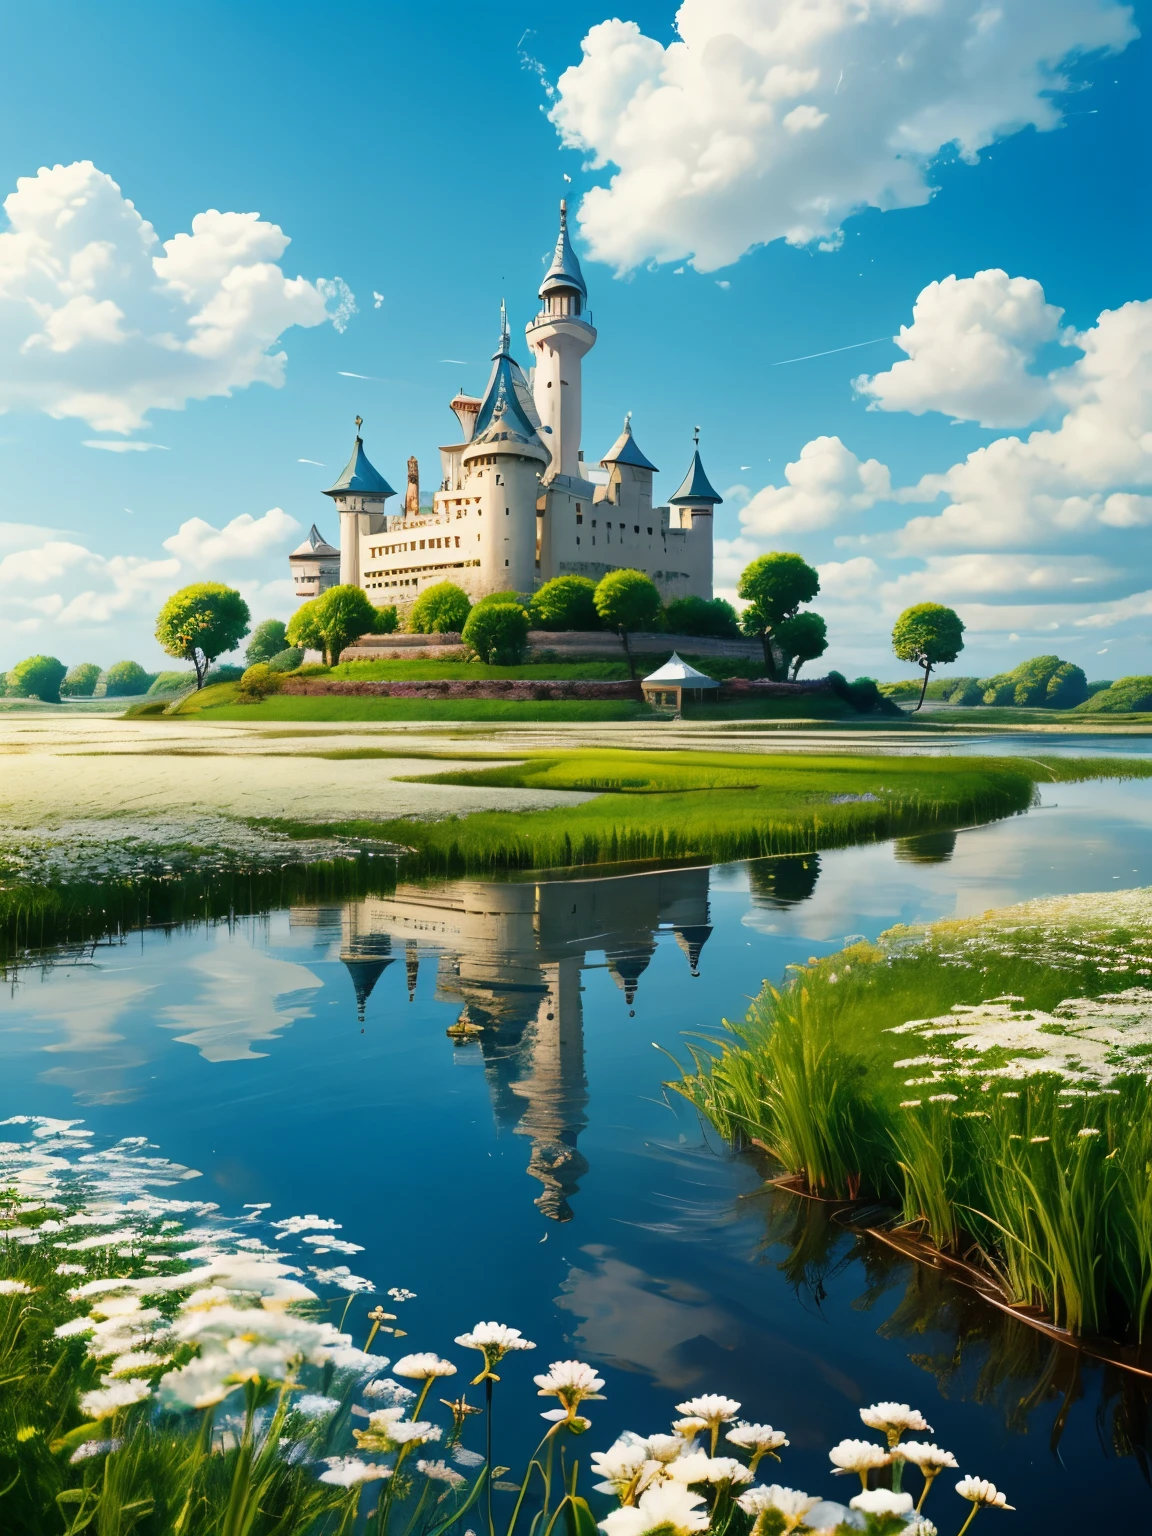 Realistic, Genuine, Beautiful and wonderful landscape, oil, Studio Ghibli, Hayao Miyazaki, Petal meadow with blue sky and white clouds, floating clouds, Floating Island, floating castle